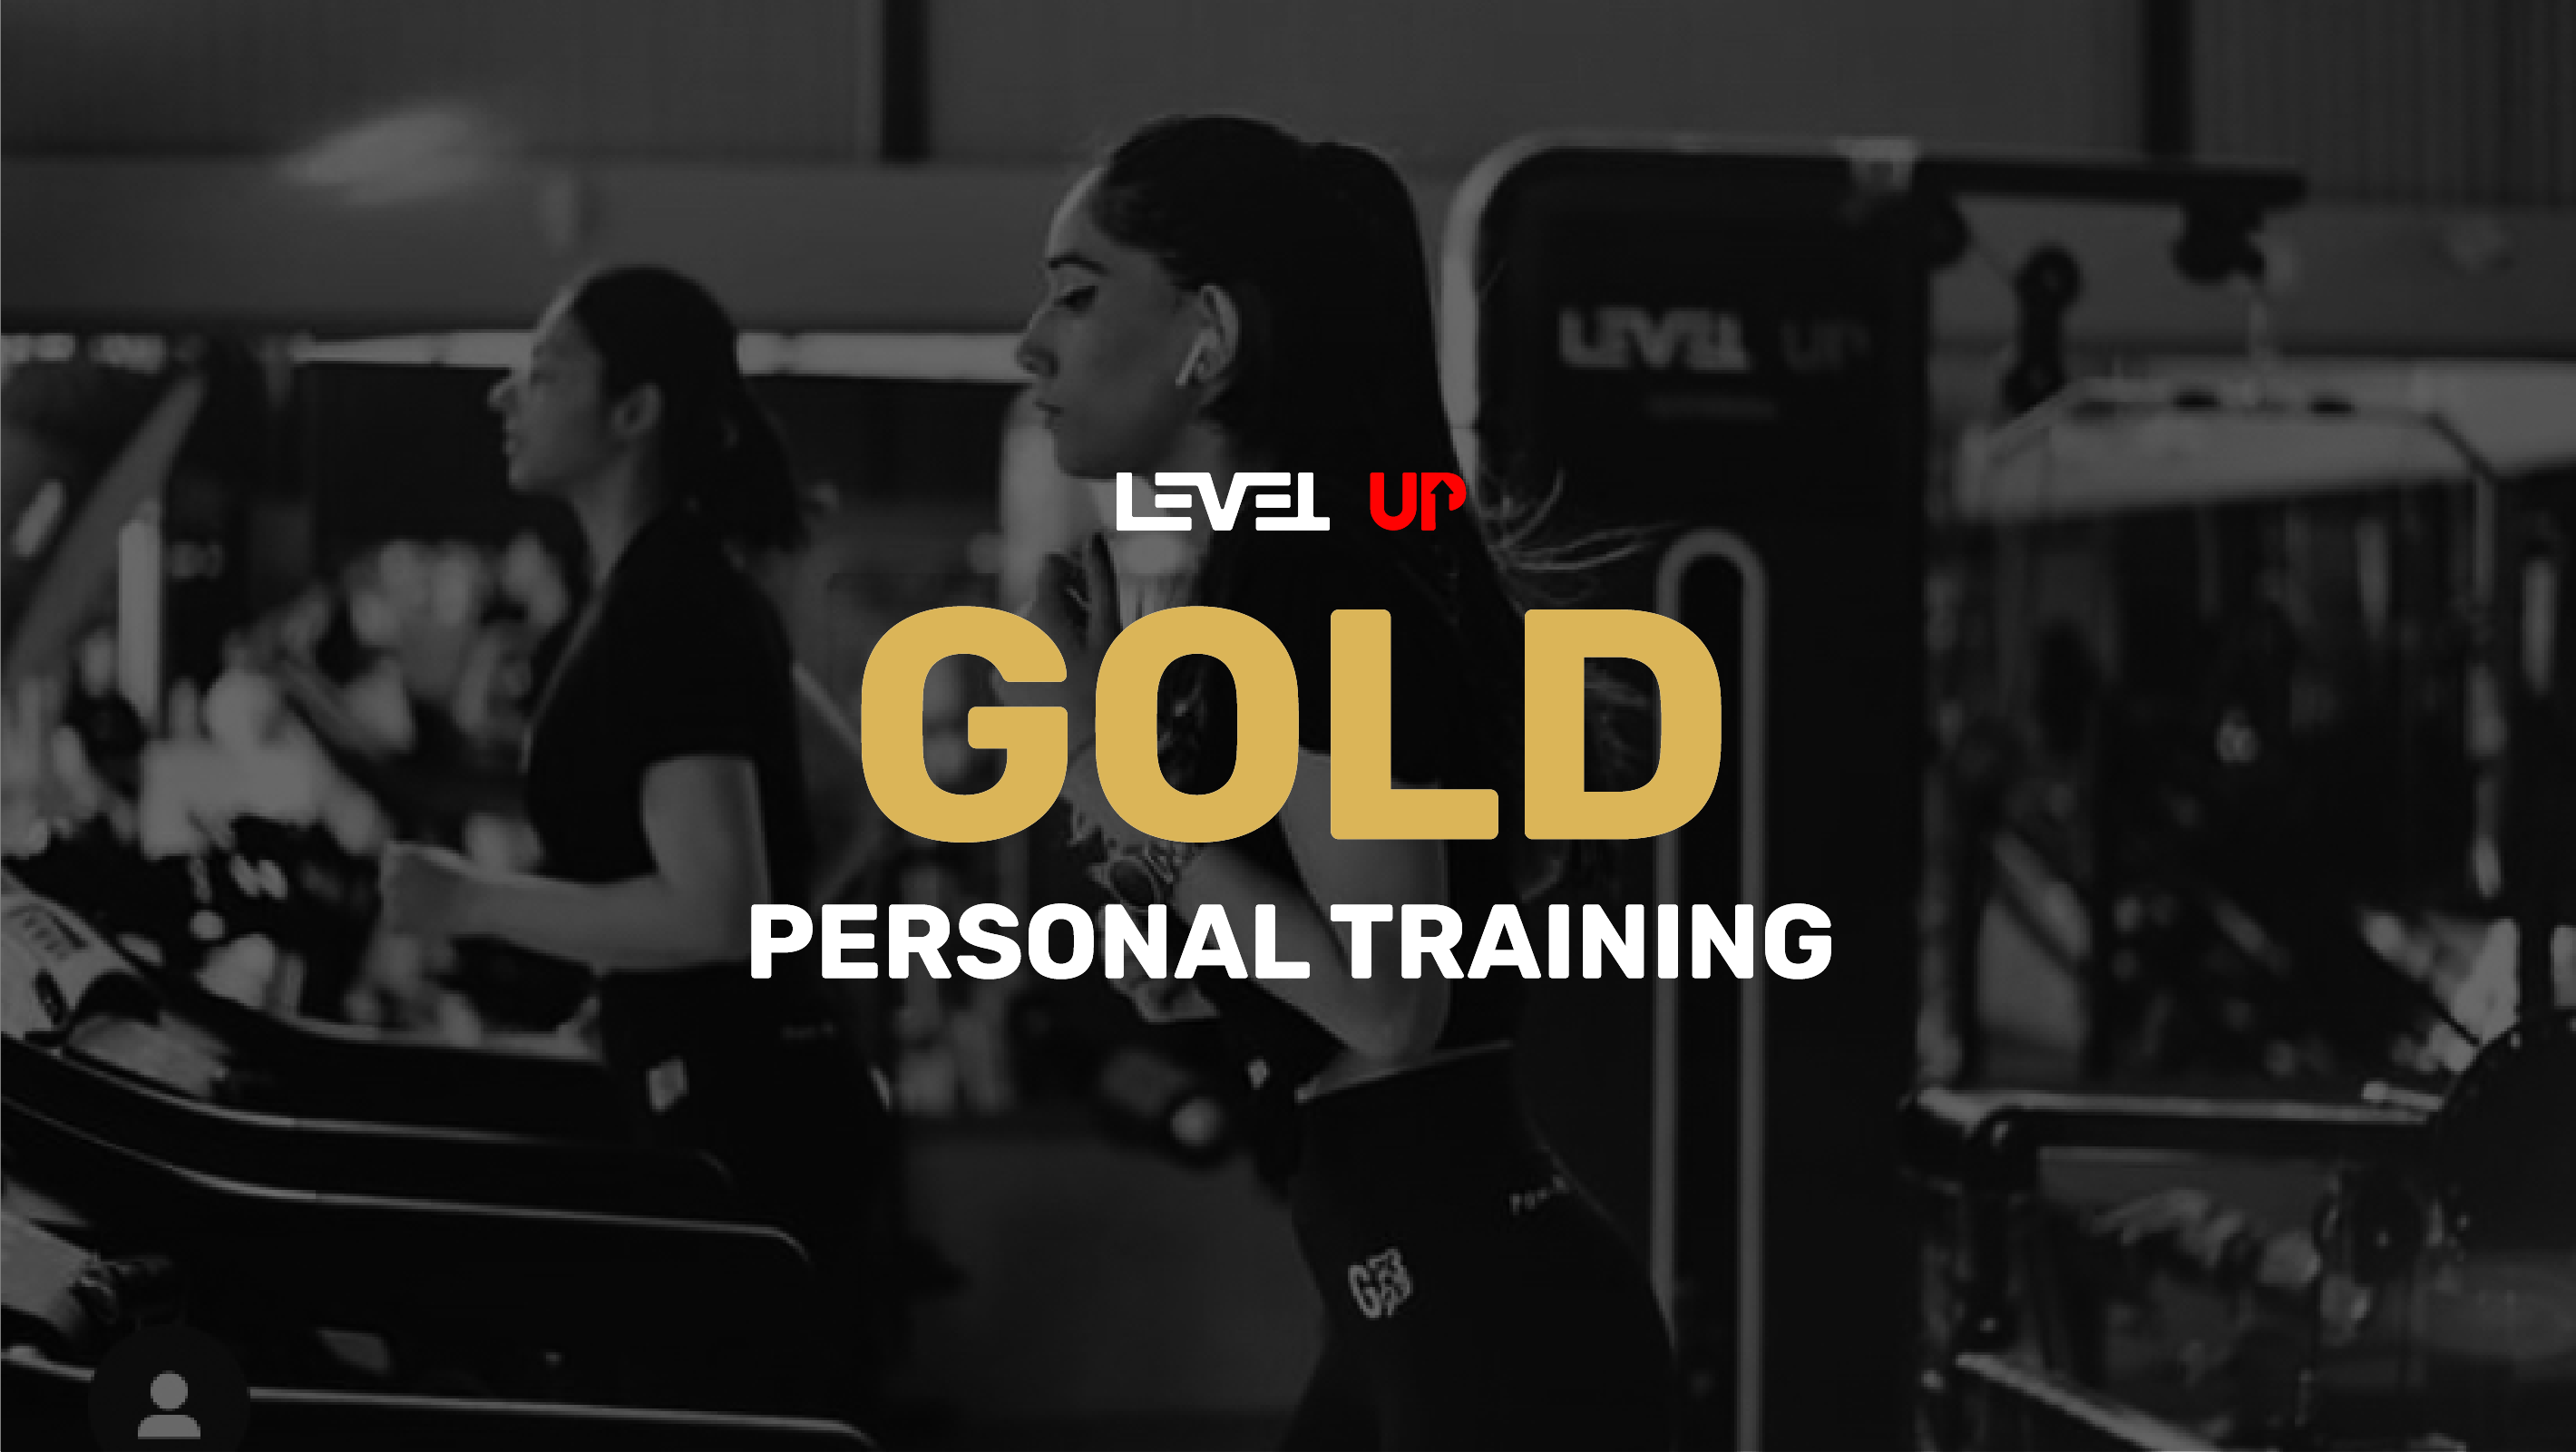 Level Up GOLD Personal Training